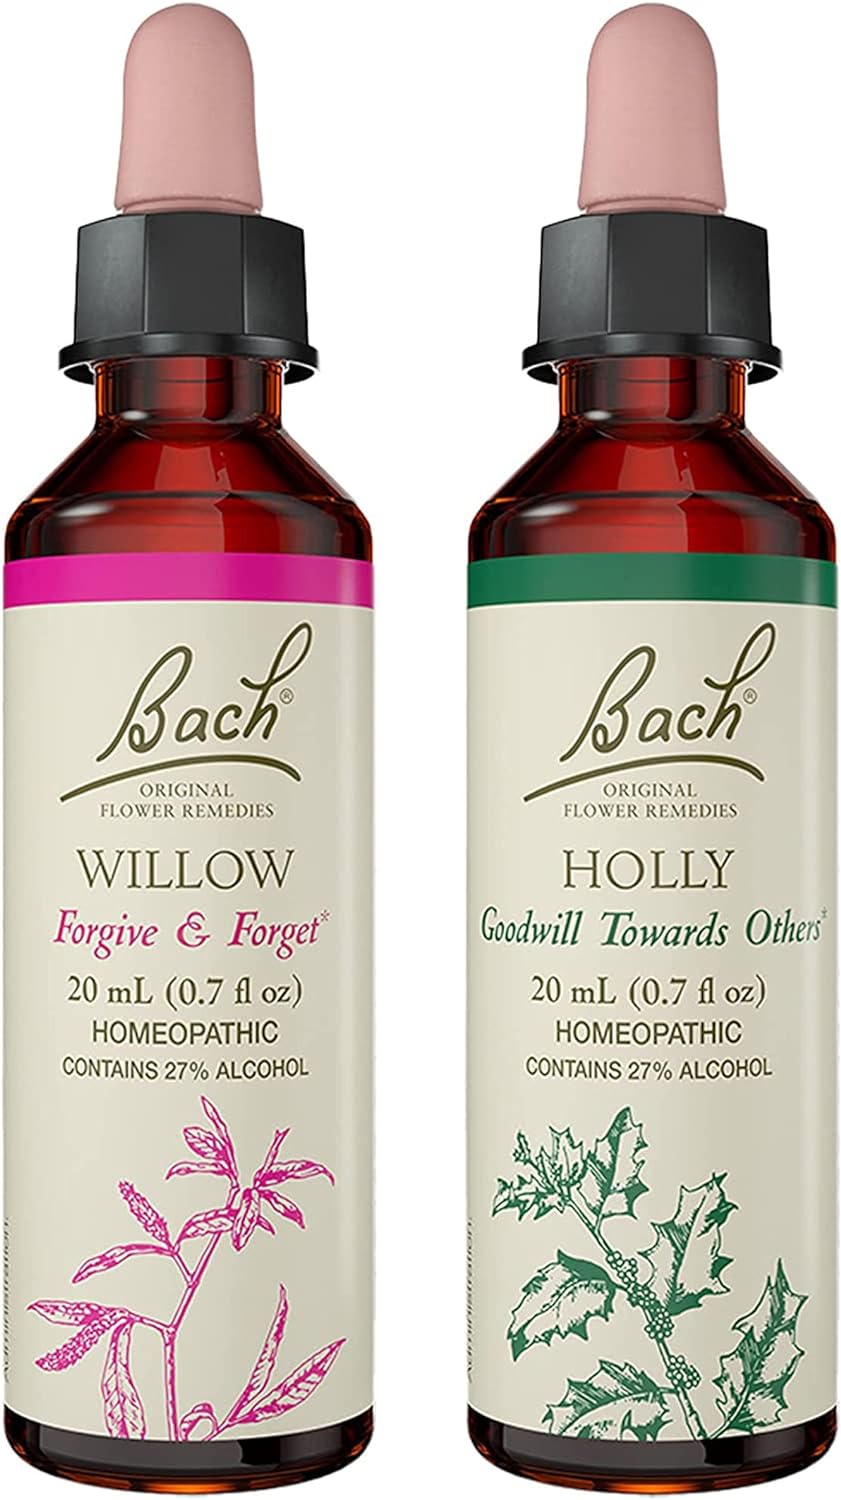 Bach Original Flower Remedies 2-Pack,"Forgive & Forget" - Holly, Willow, Homeopathic Flower Essences, Vegan, 20mL Dropper x2, Empty Mixing Bottle x1